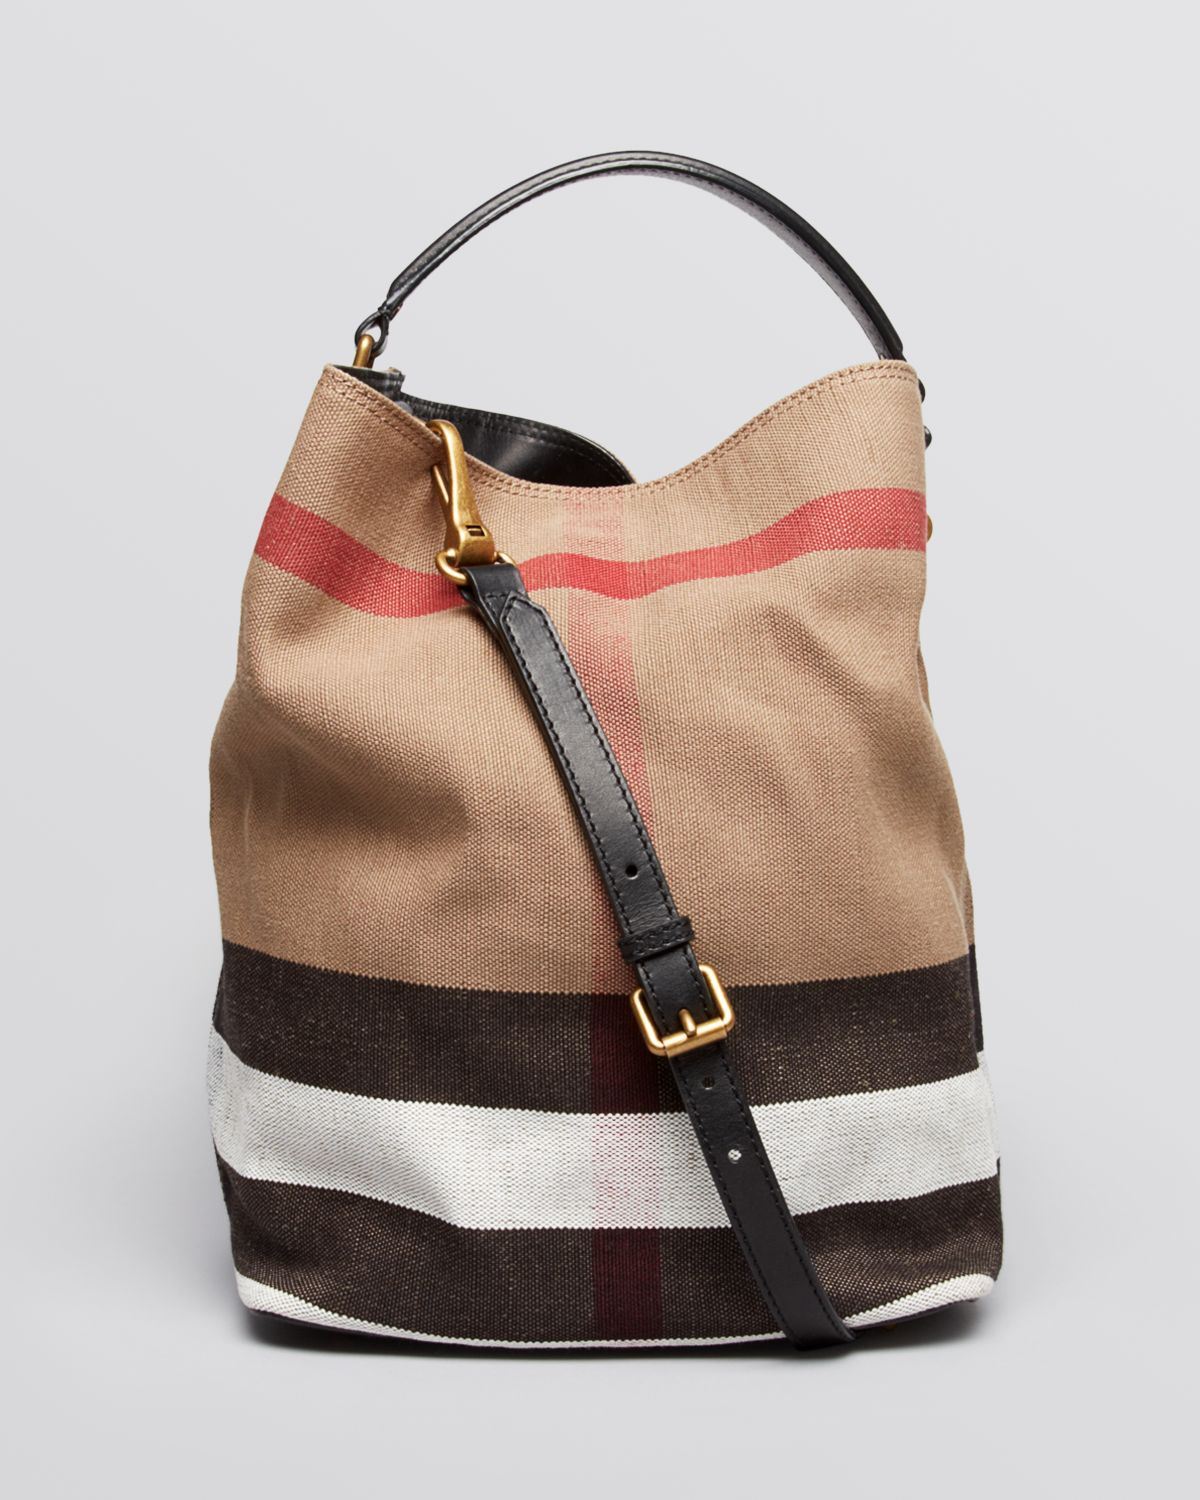 Burberry Canvas Check Medium Ashby Hobo in Black (Brown) - Lyst